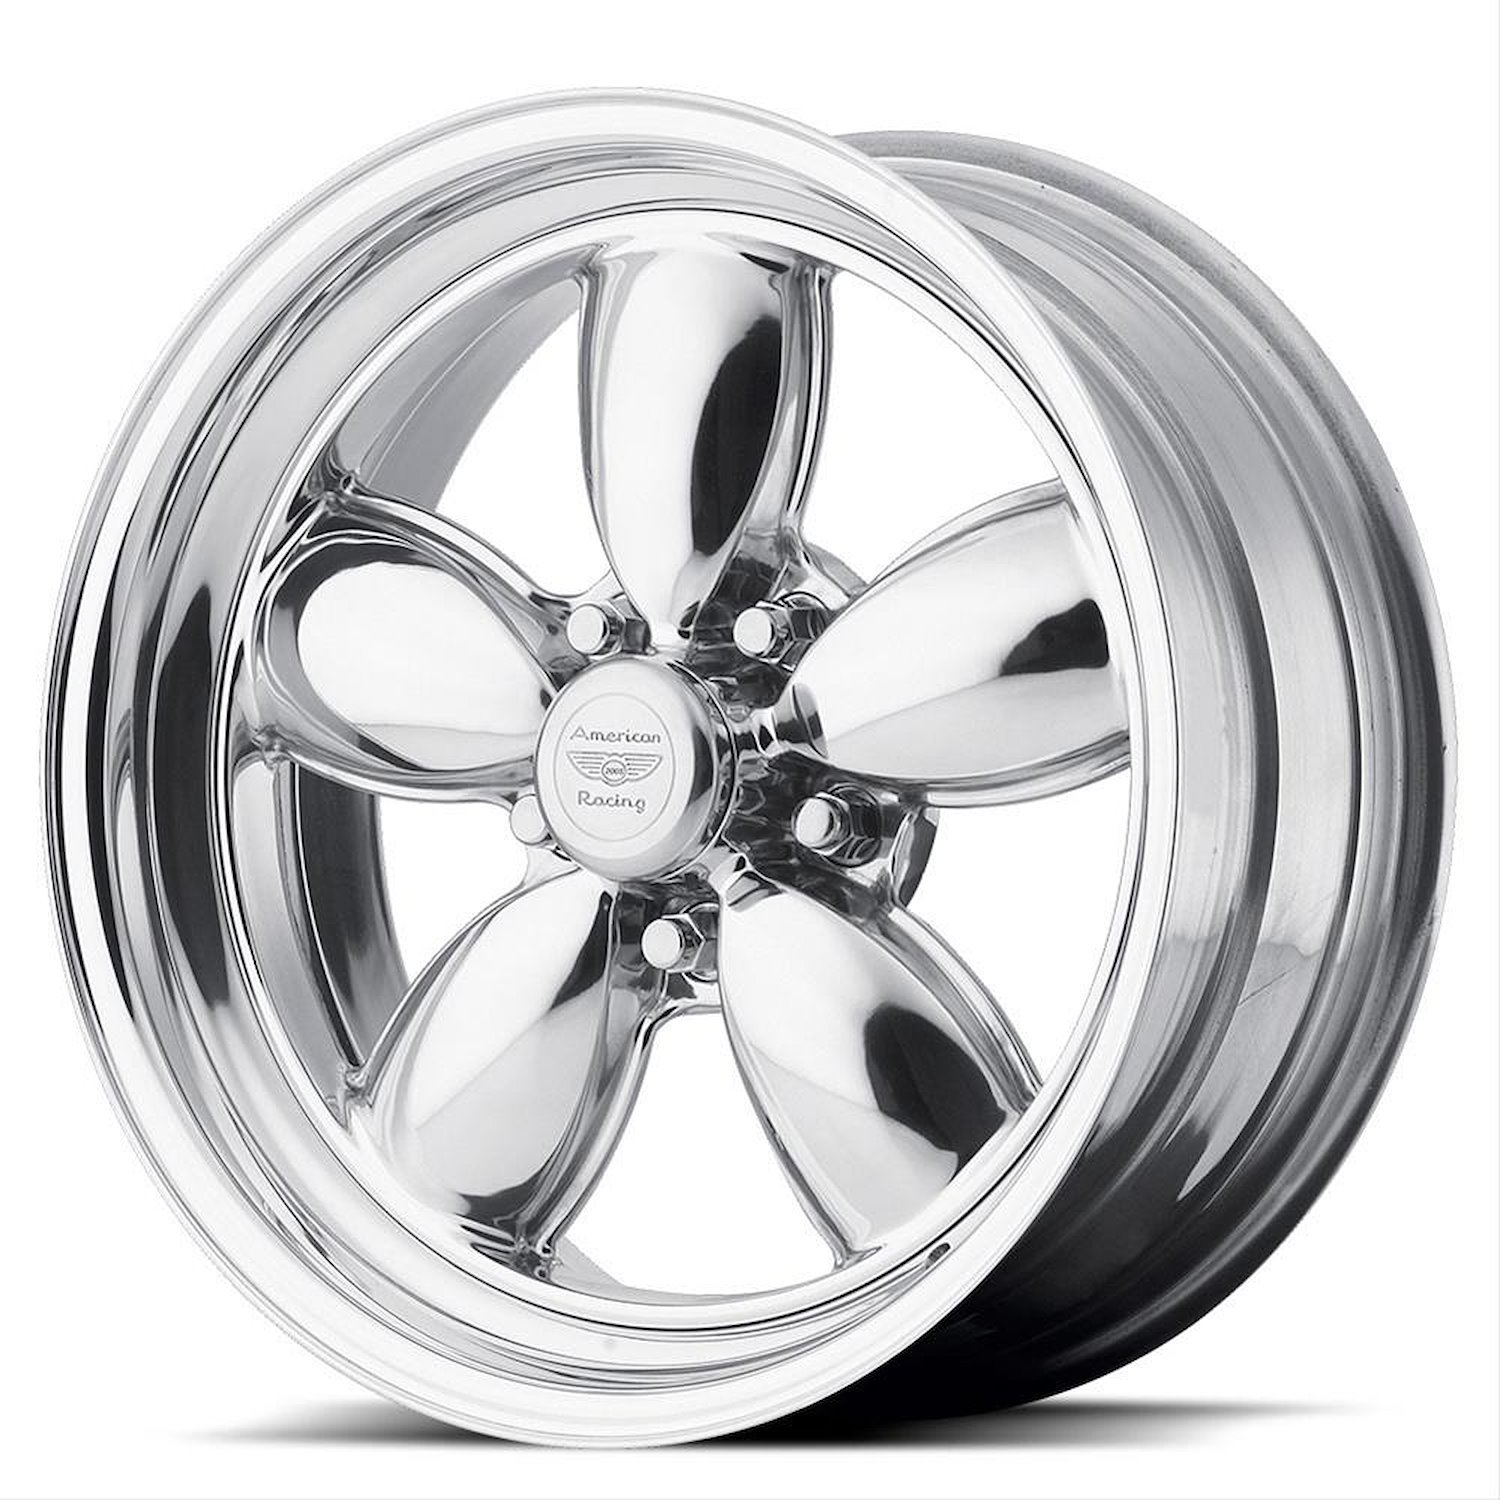 AMERICAN RACING CLASSIC 200S TWO-PIECE POLISHED 15 x 7 5X4.75 0 4.00